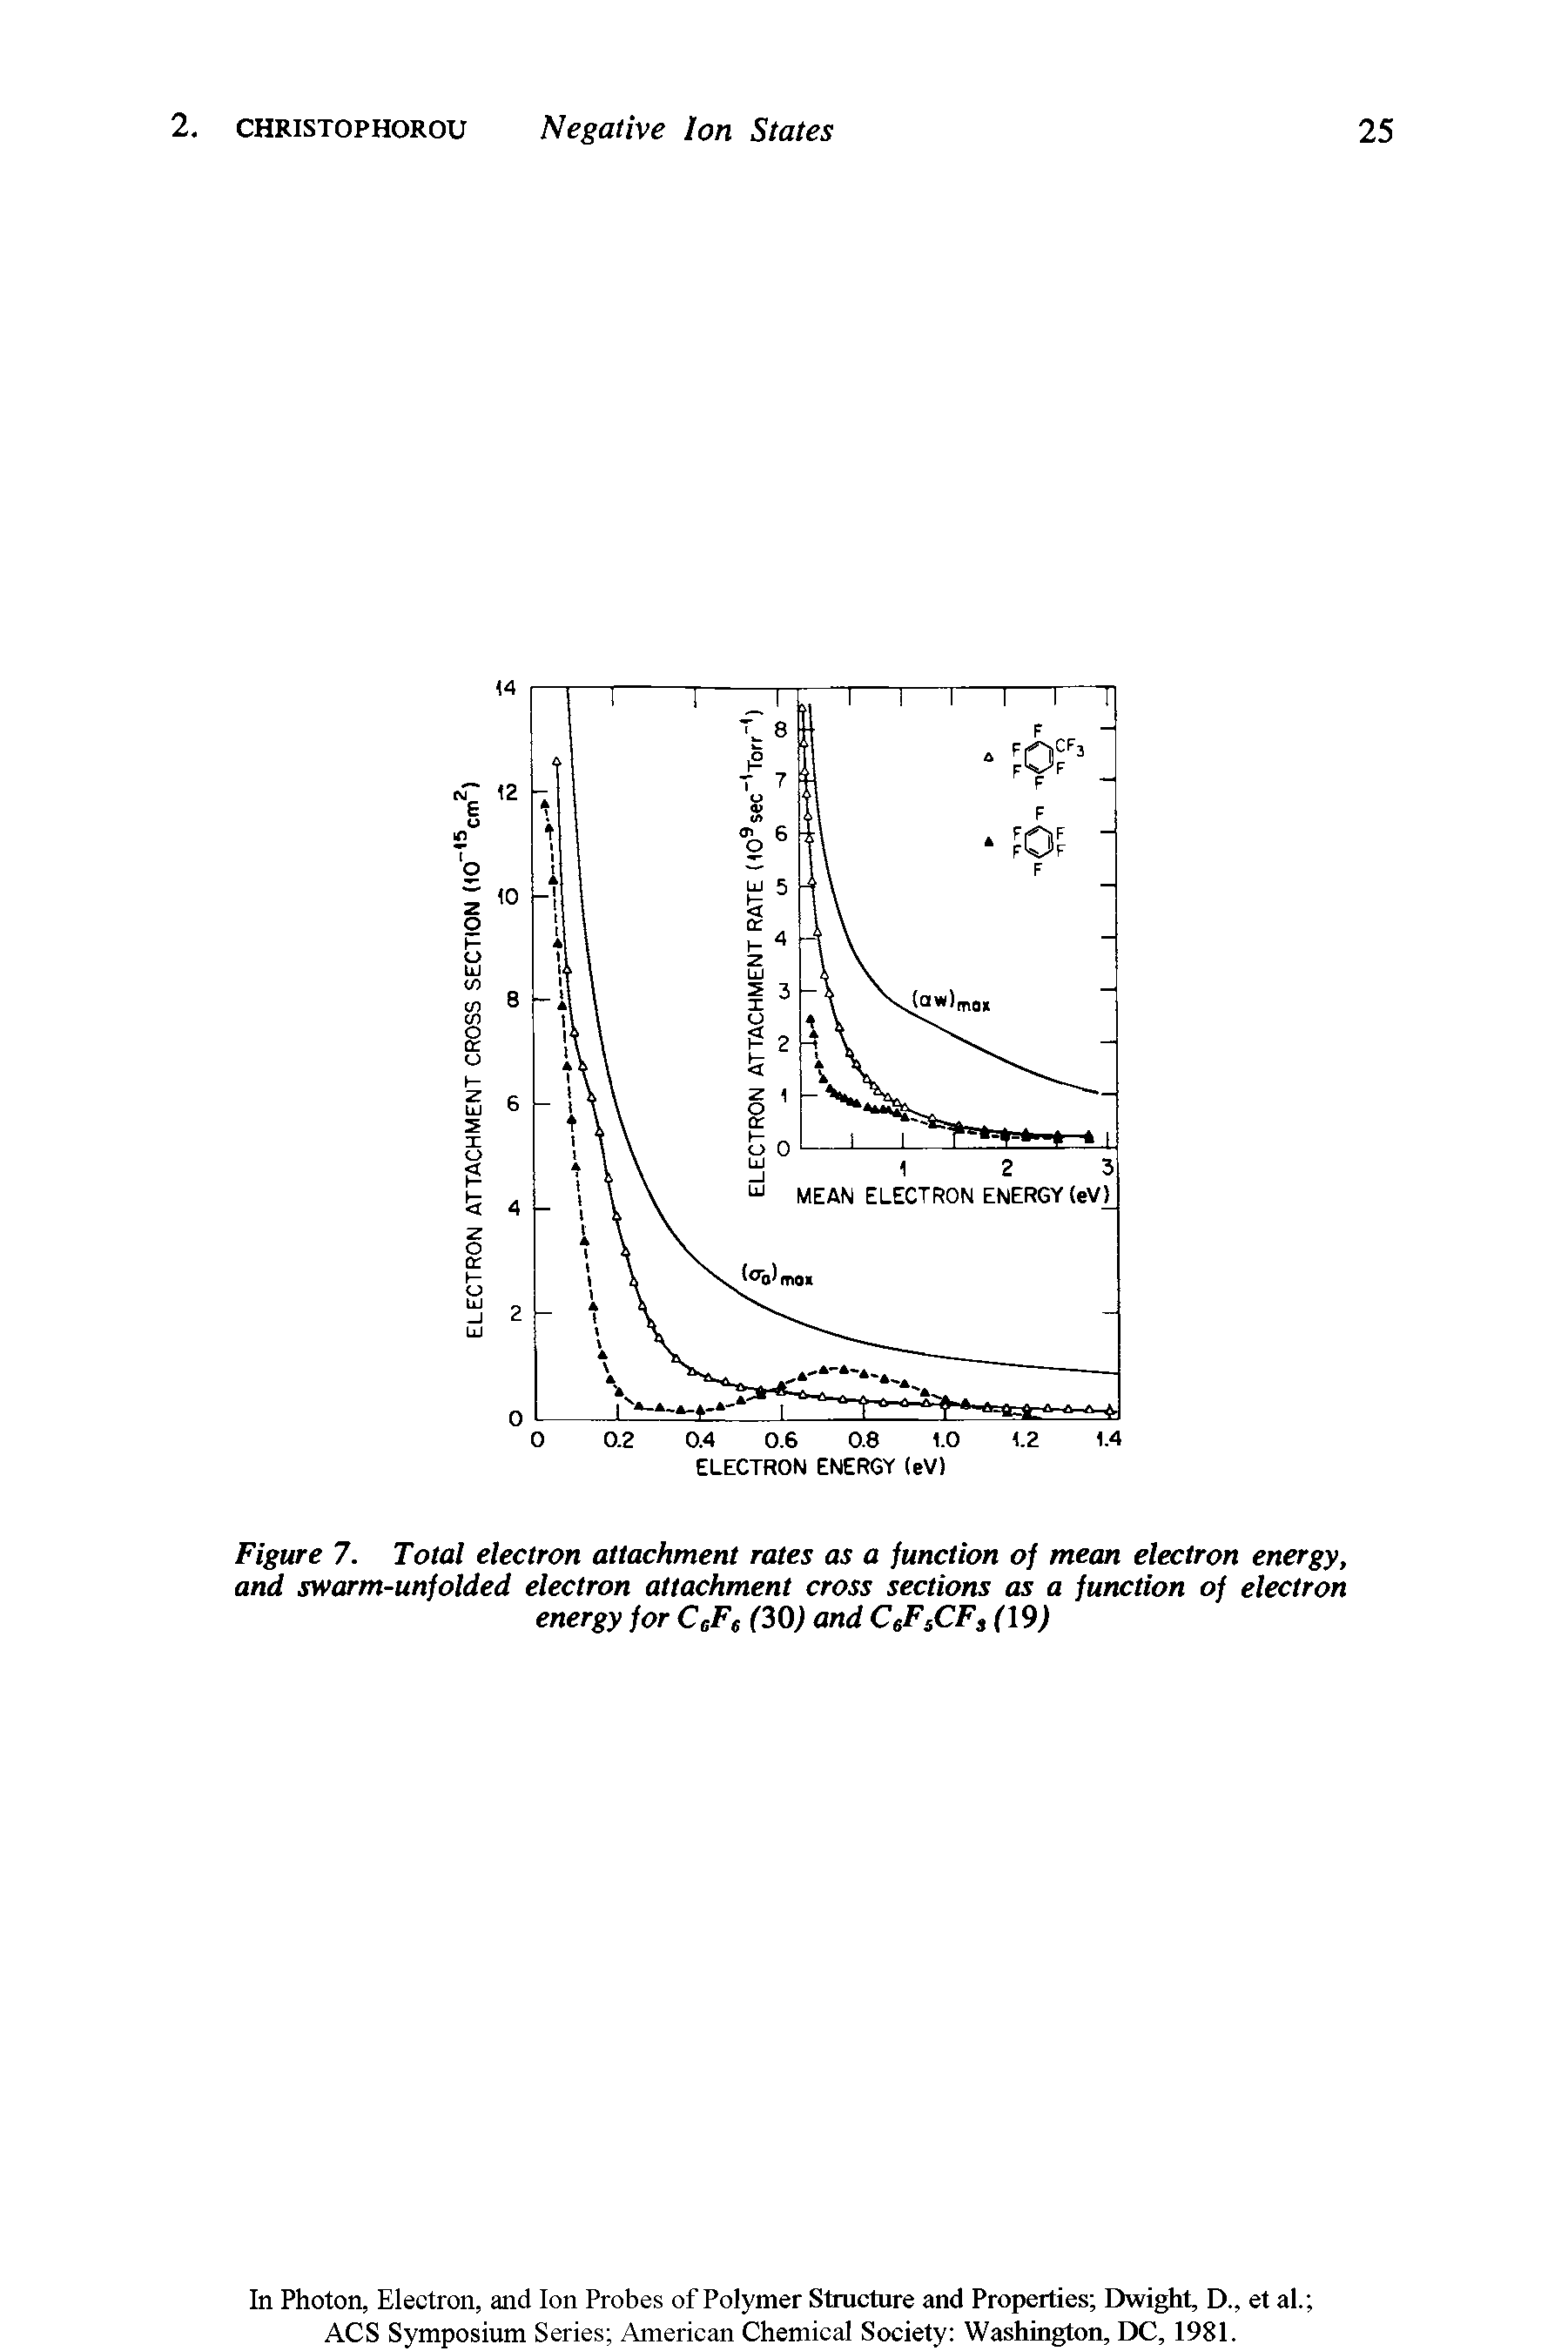 Figure 7. Total electron attachment rates as a function of mean electron energy, and swarm-unfolded electron attachment cross sections as a function of electron energy for CcFe (30) and CeFsCF, (19)...